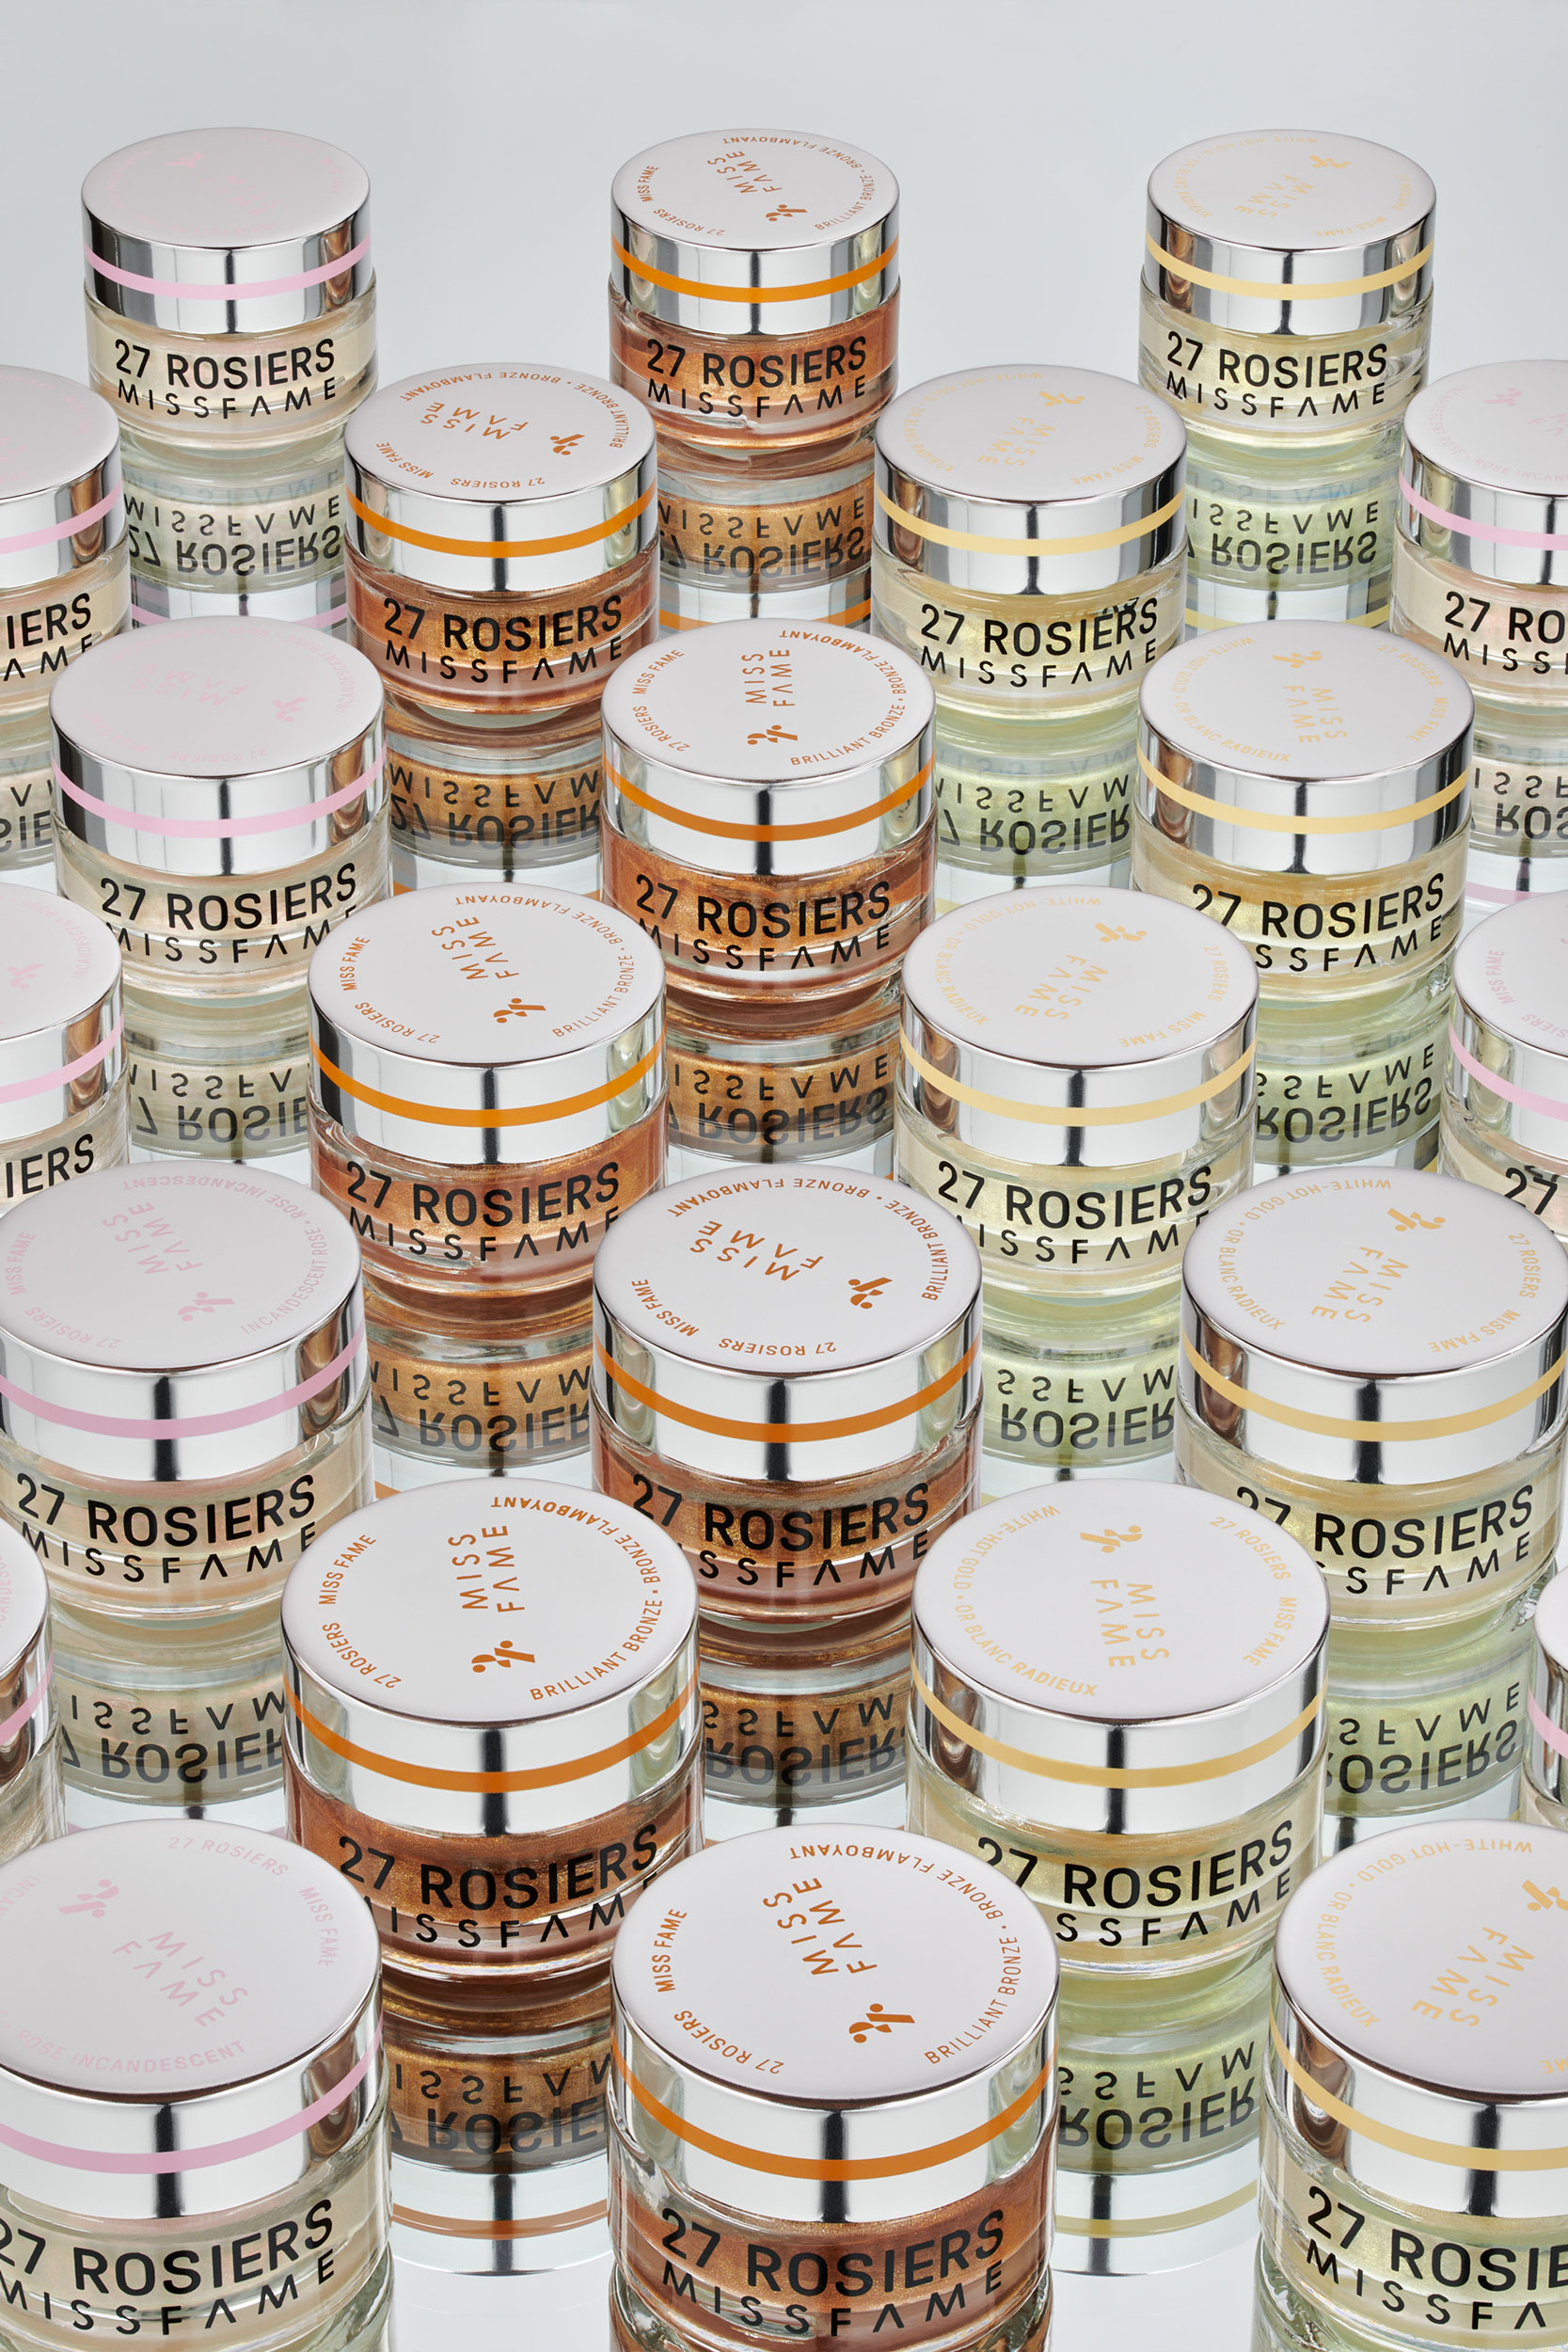 Cosmetic product containers styled in uniformed pattern on mirrored surface